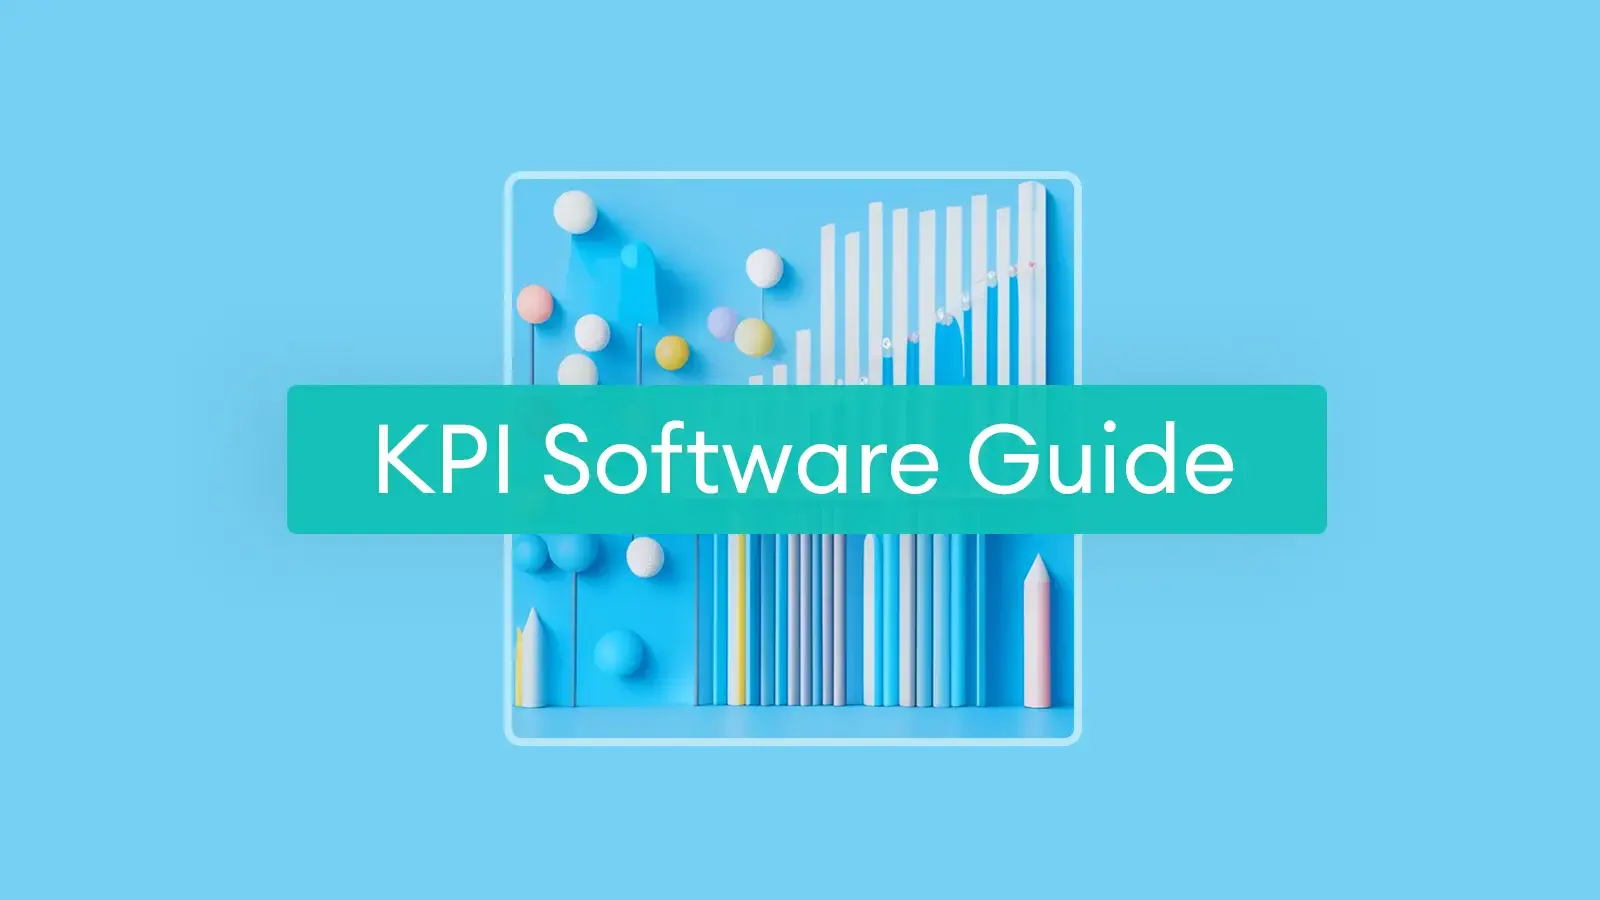 The words KPI Software Guide are written on a green banner over a blue abstract image containing data chart and graph components.